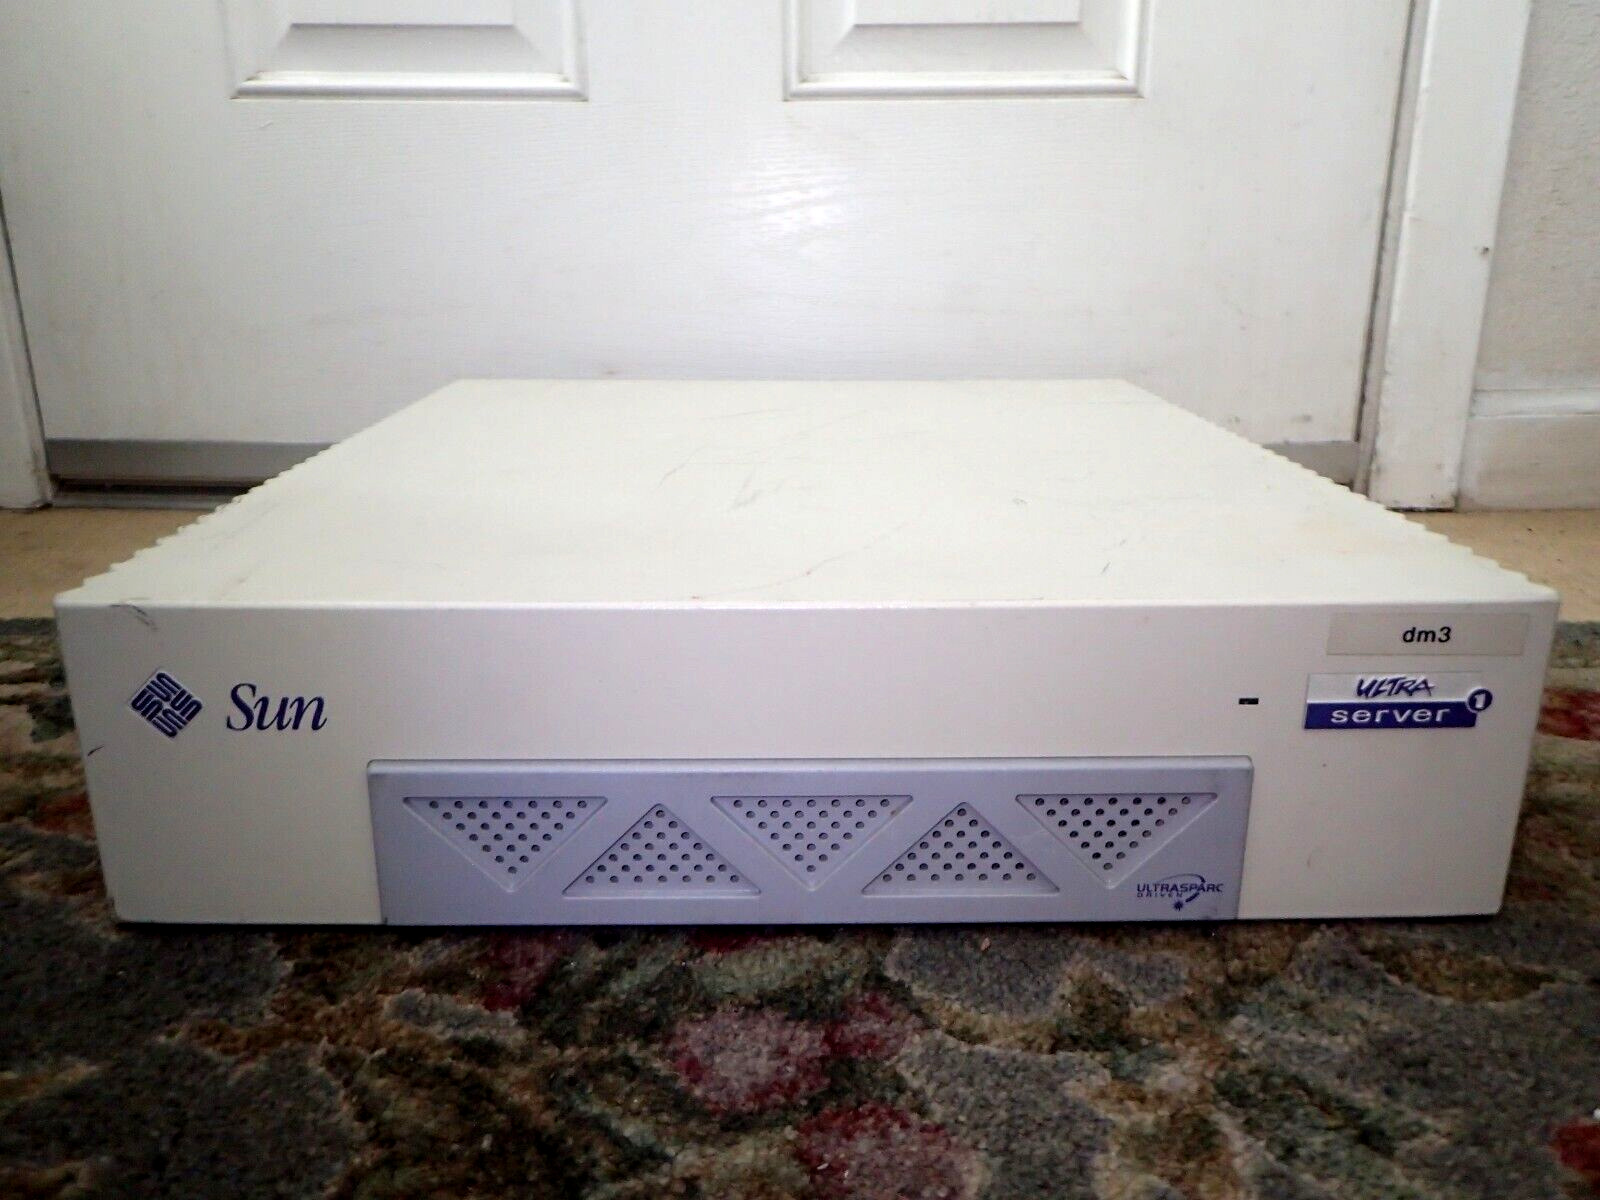 SUN MICROSYSTEMS ULTRA 1 WORKSTATION 600-3928-01 w/ 2x SCSI HDD Powers Up